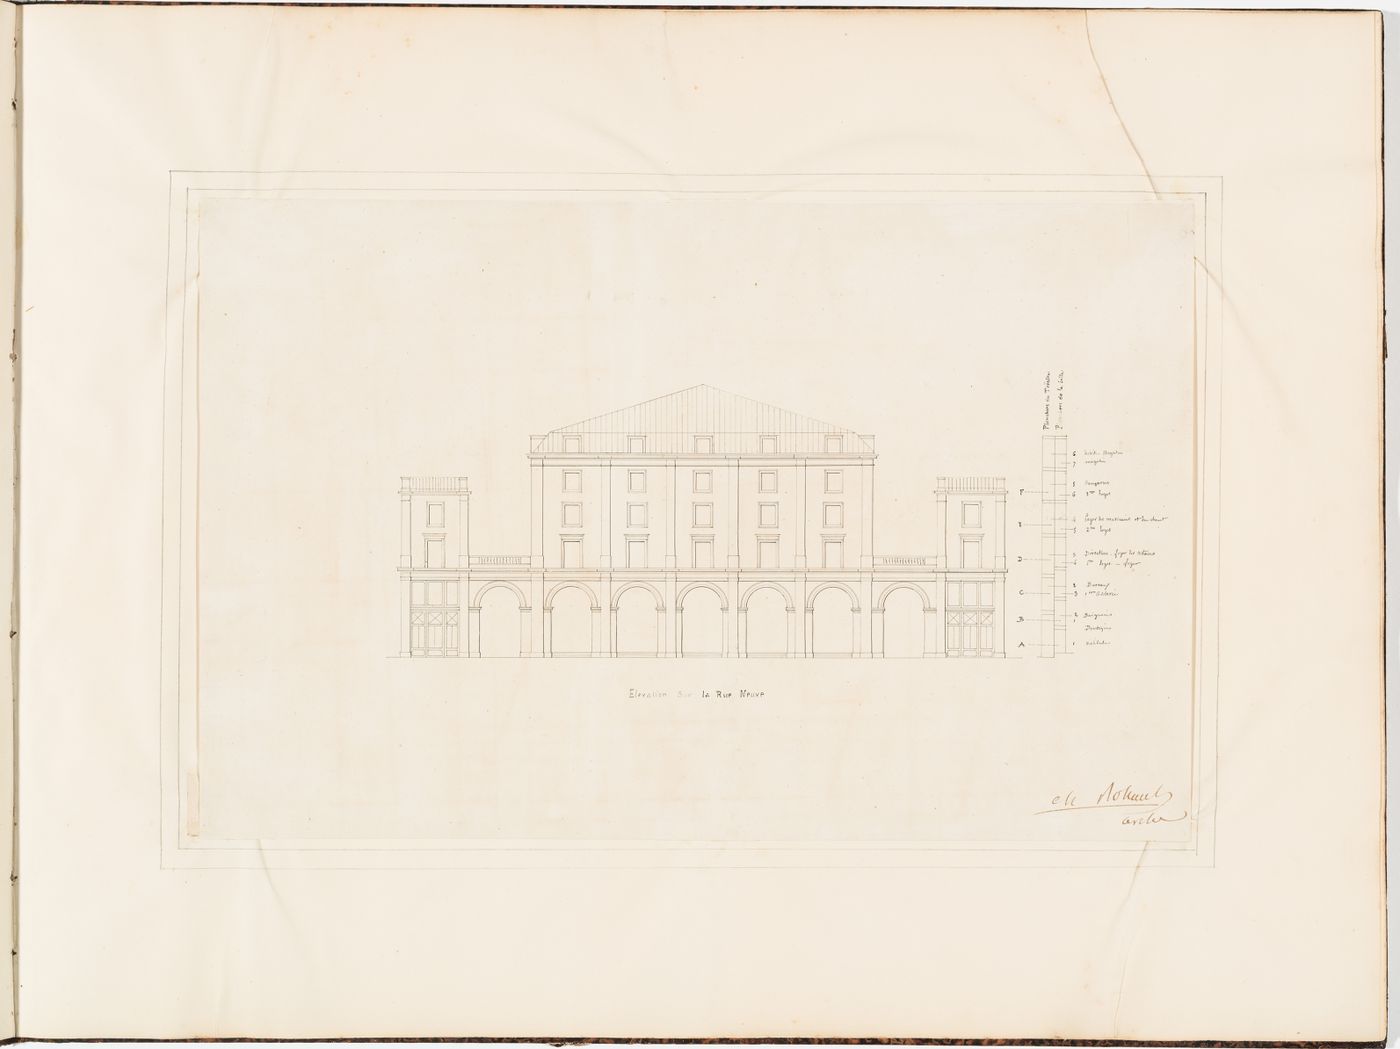 Elevation for a façade of the Théâtre Royal Italien on a site opposite the rue de la Paix, with a bar graph indicating the "Planchers du Théâtre" and the "Planchers de la Salle"